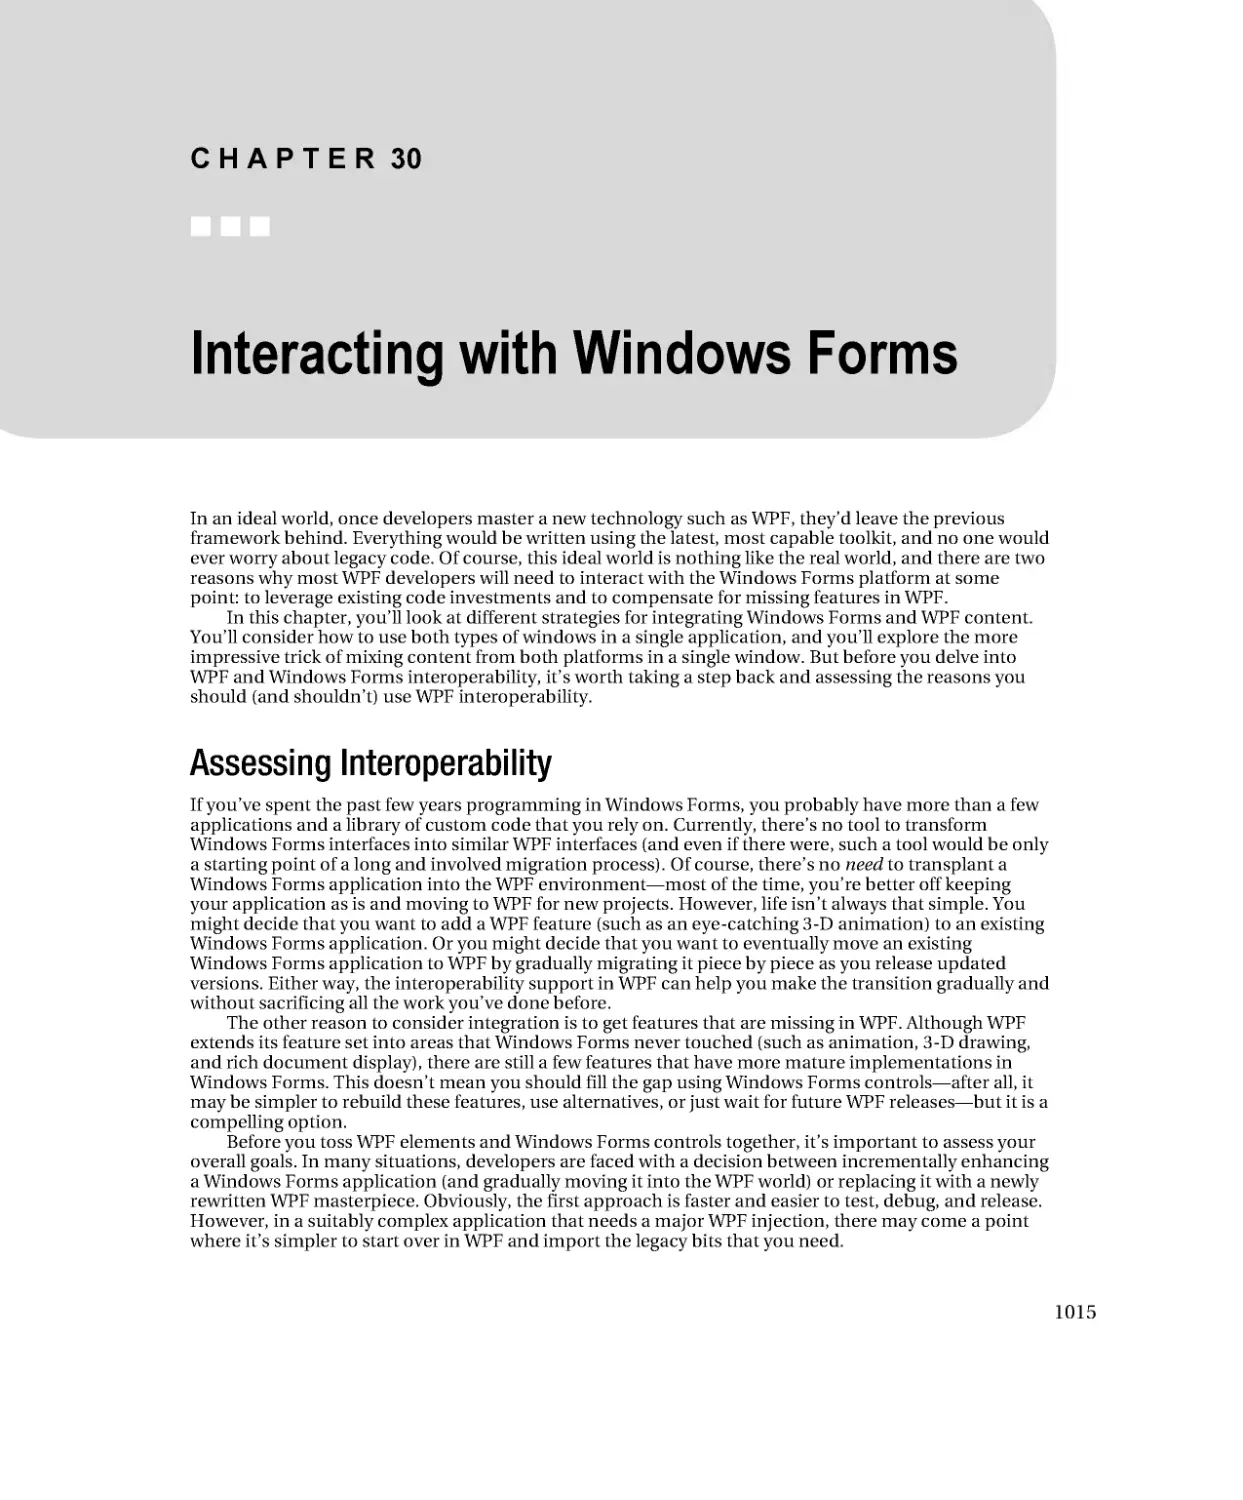 Interacting with Windows Forms